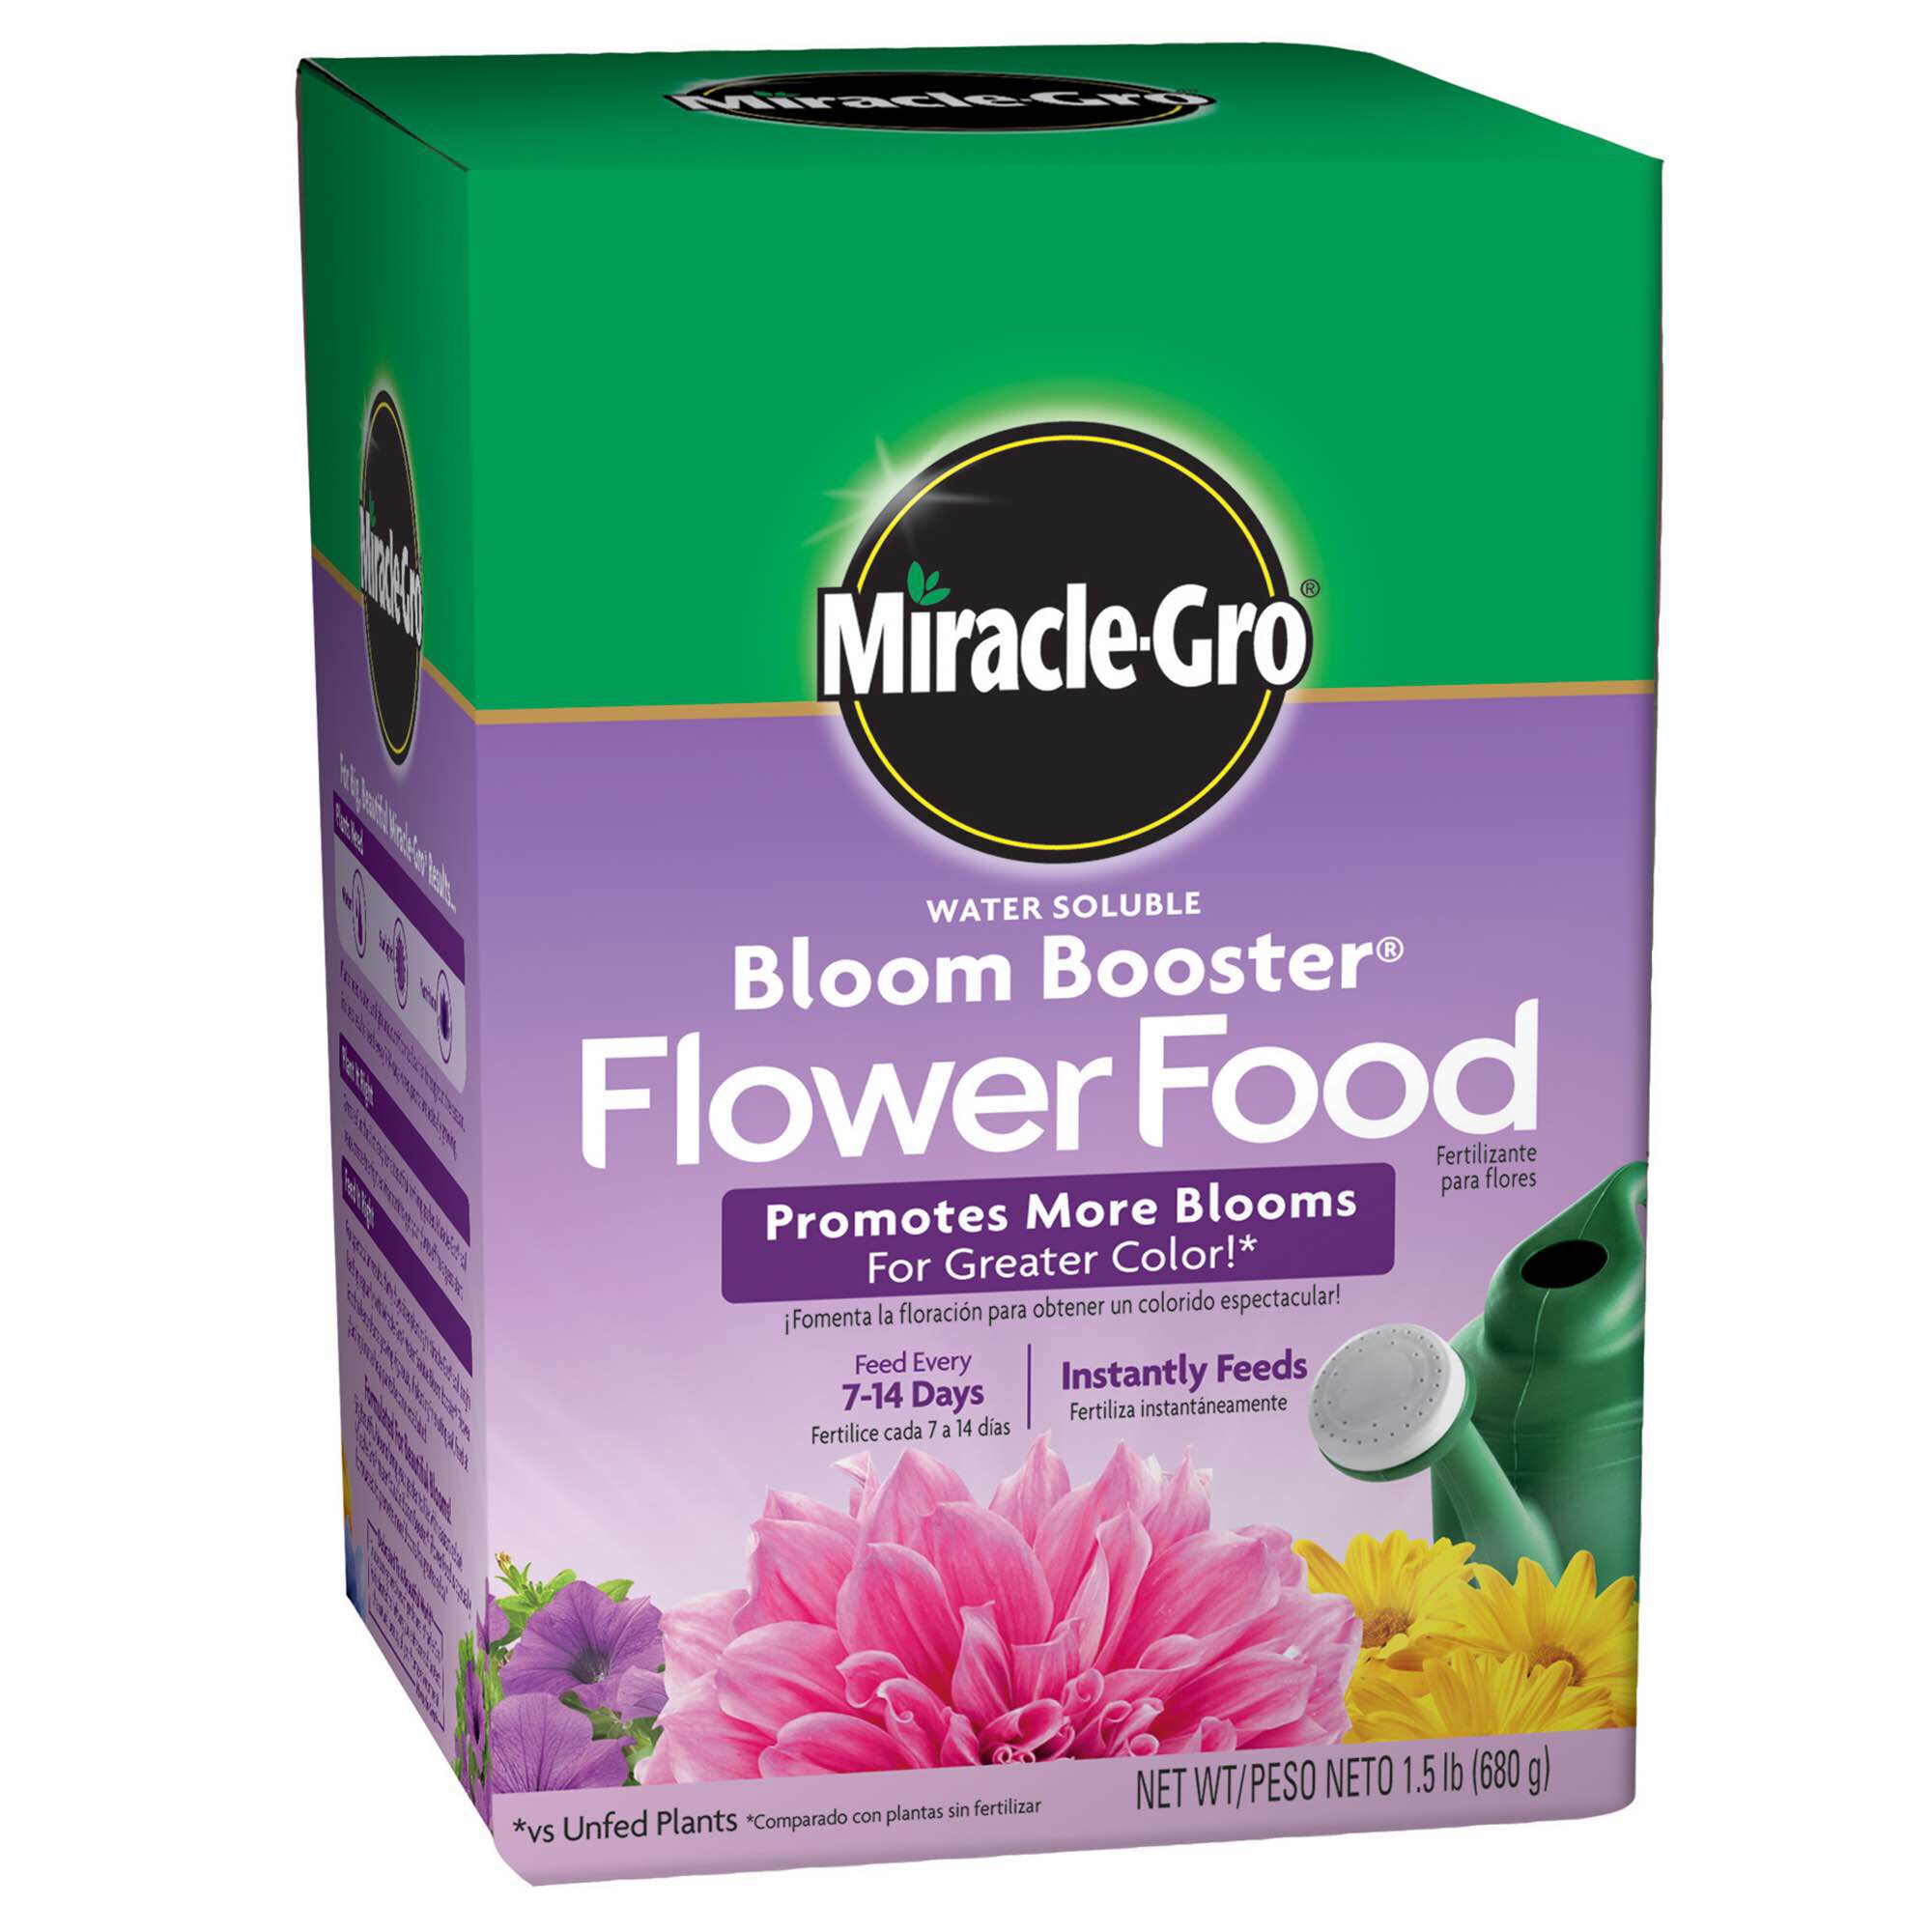 Image of Miracle-Gro Water Soluble Plant Food for petunias